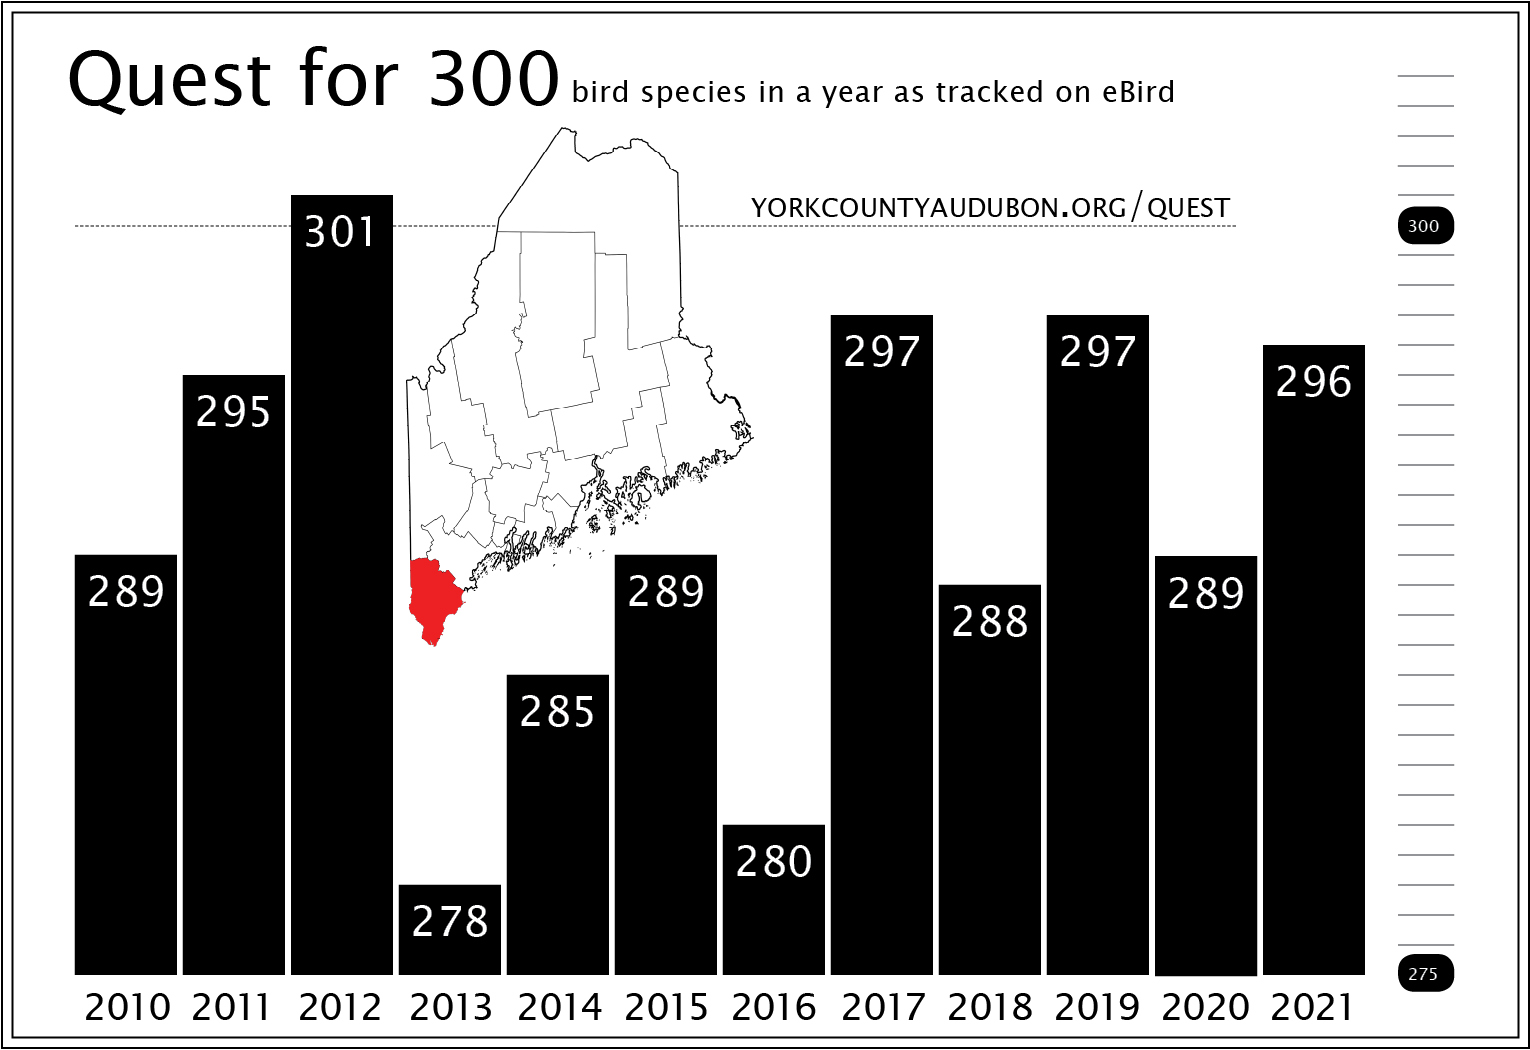 Bar chart shows 12 years of annual bird tallies for York County, Maine.